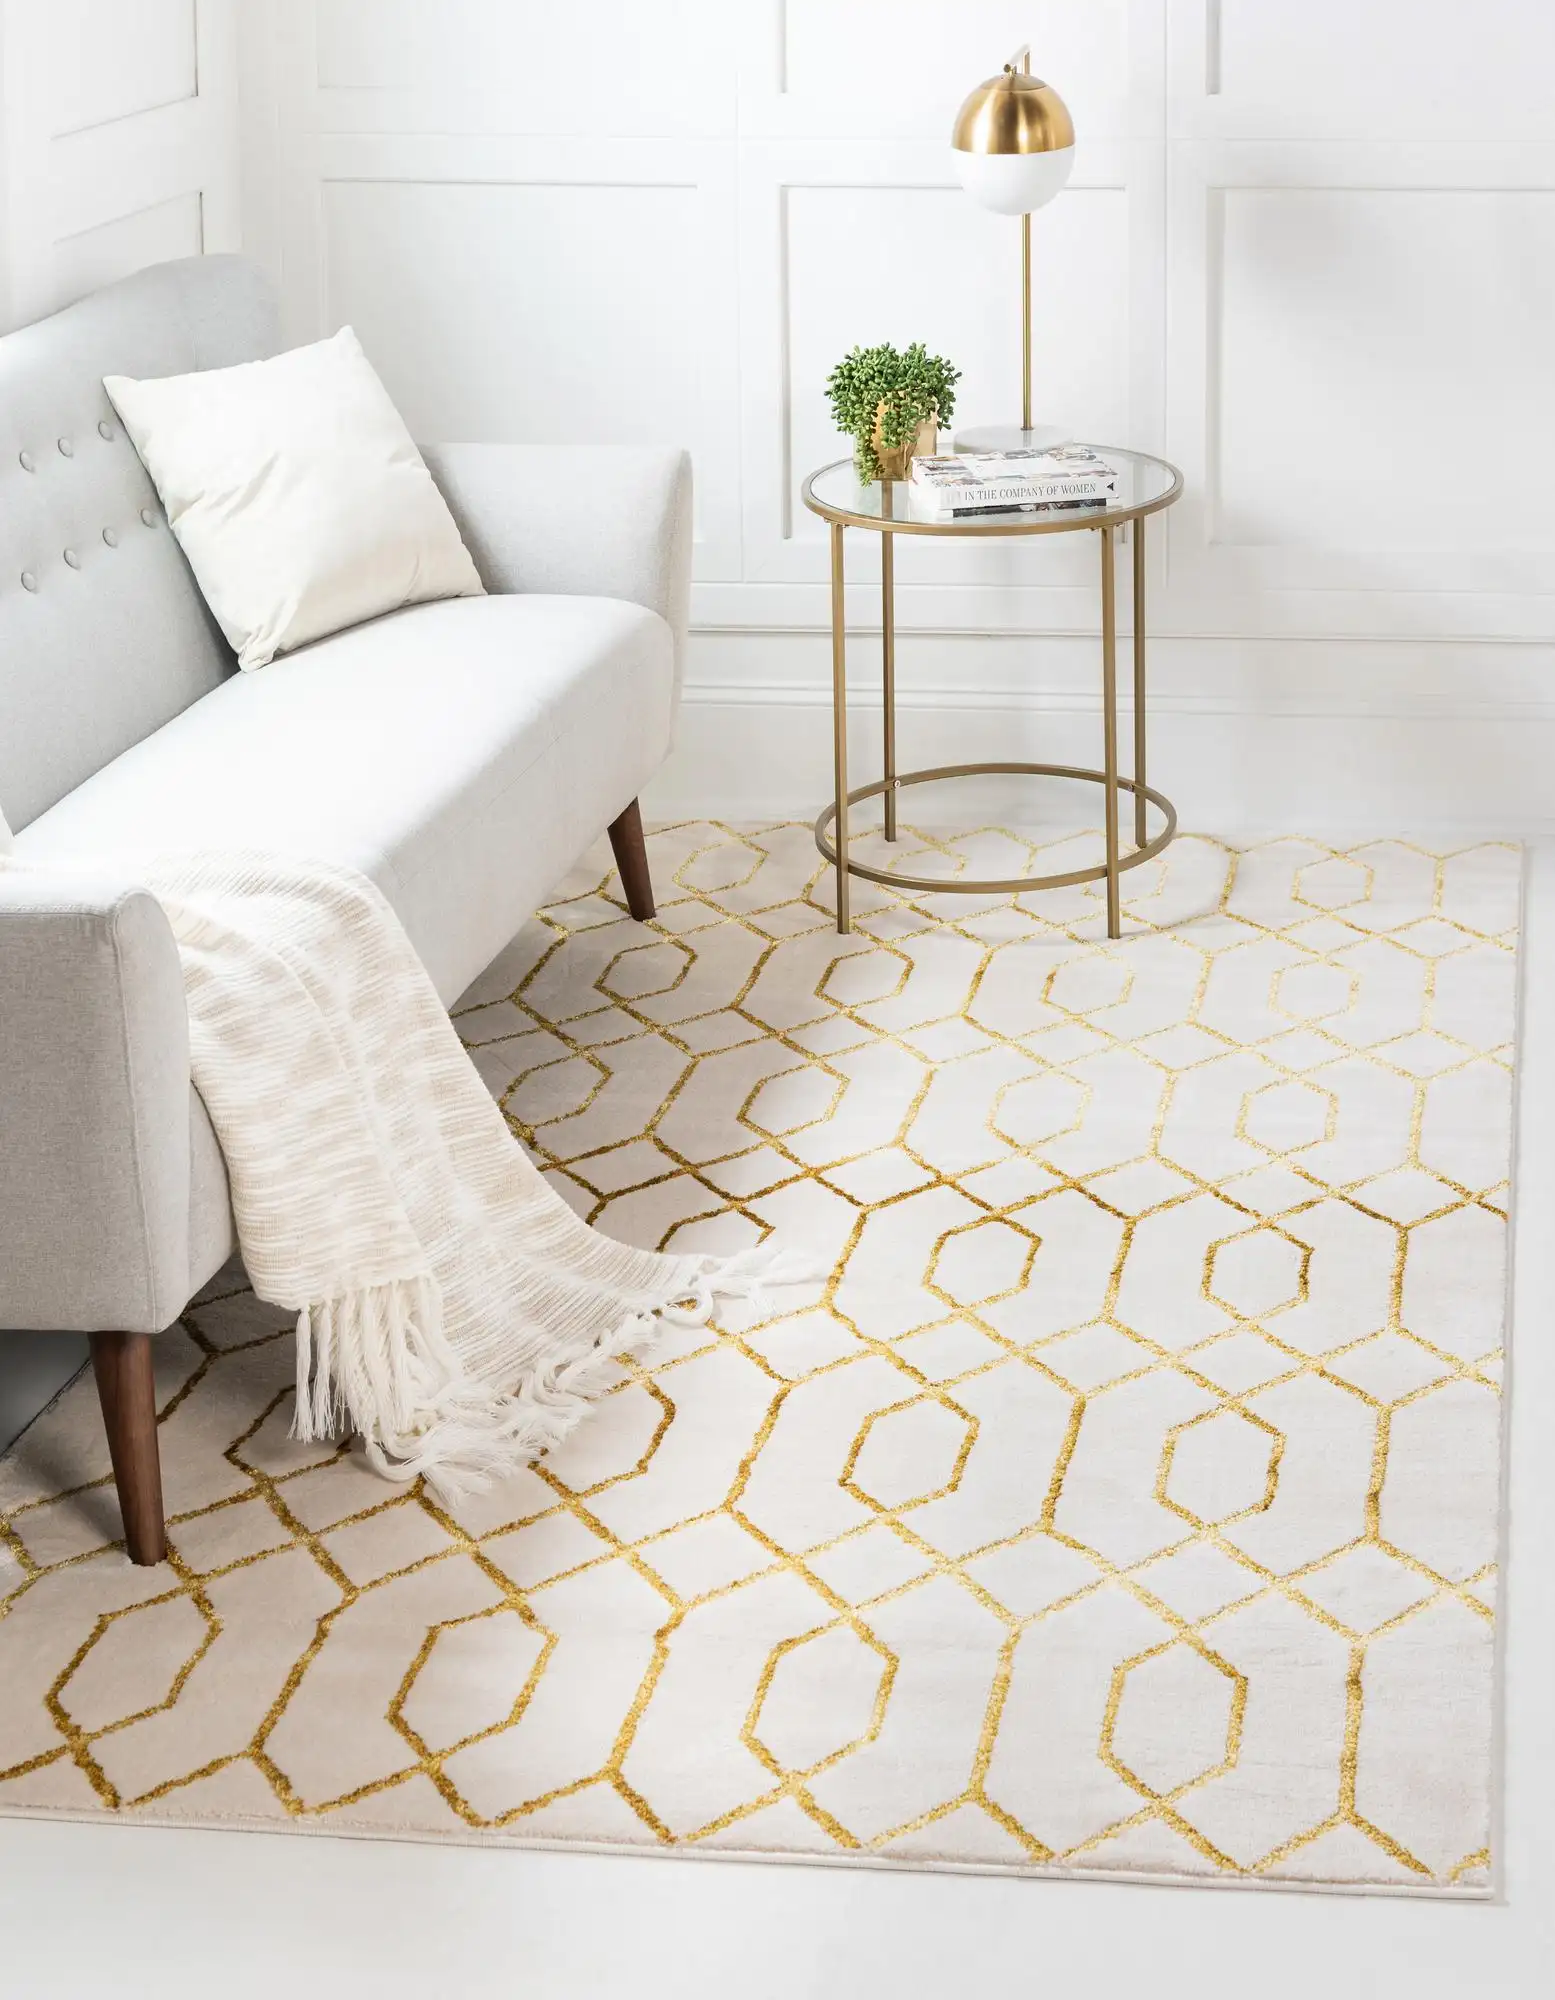 white and gold rug as glamorous home decor